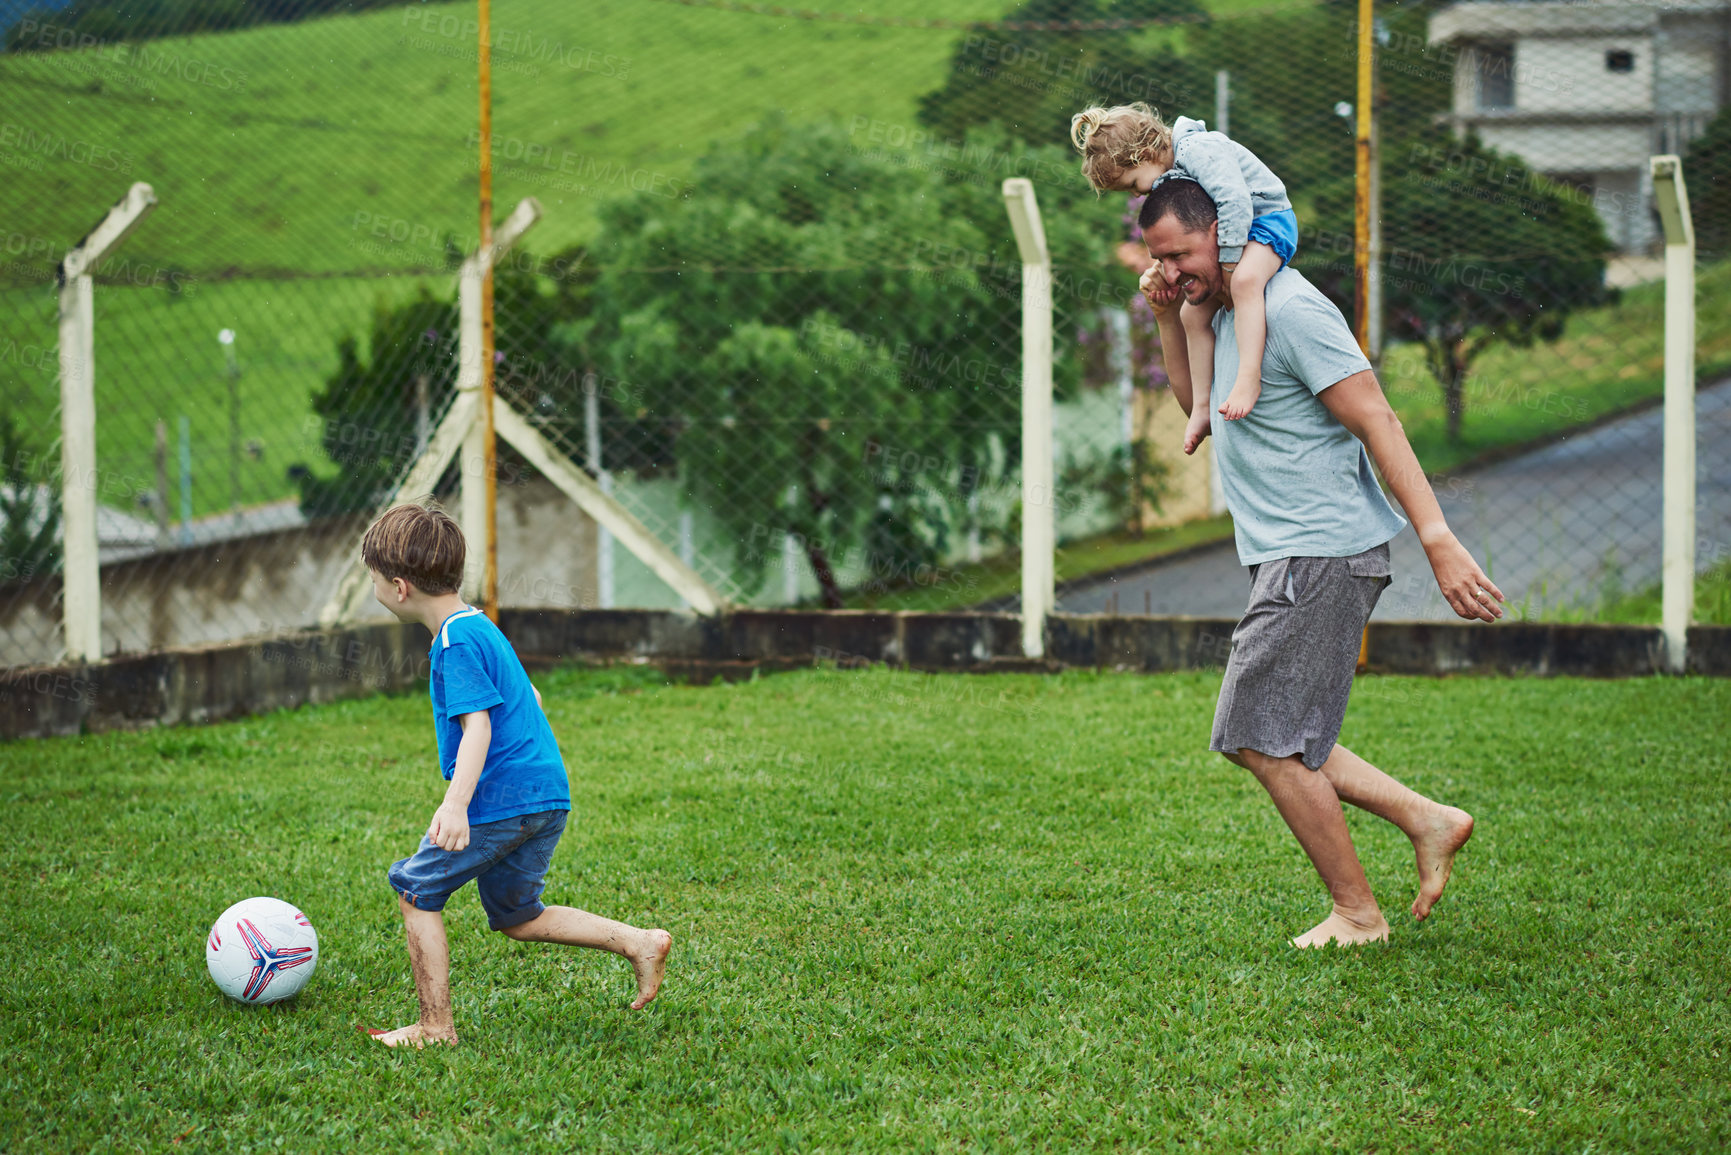 Buy stock photo Shot of a cheerful middle aged man carrying his daughter on his solders while playing soccer with his son outside during a cloudy day